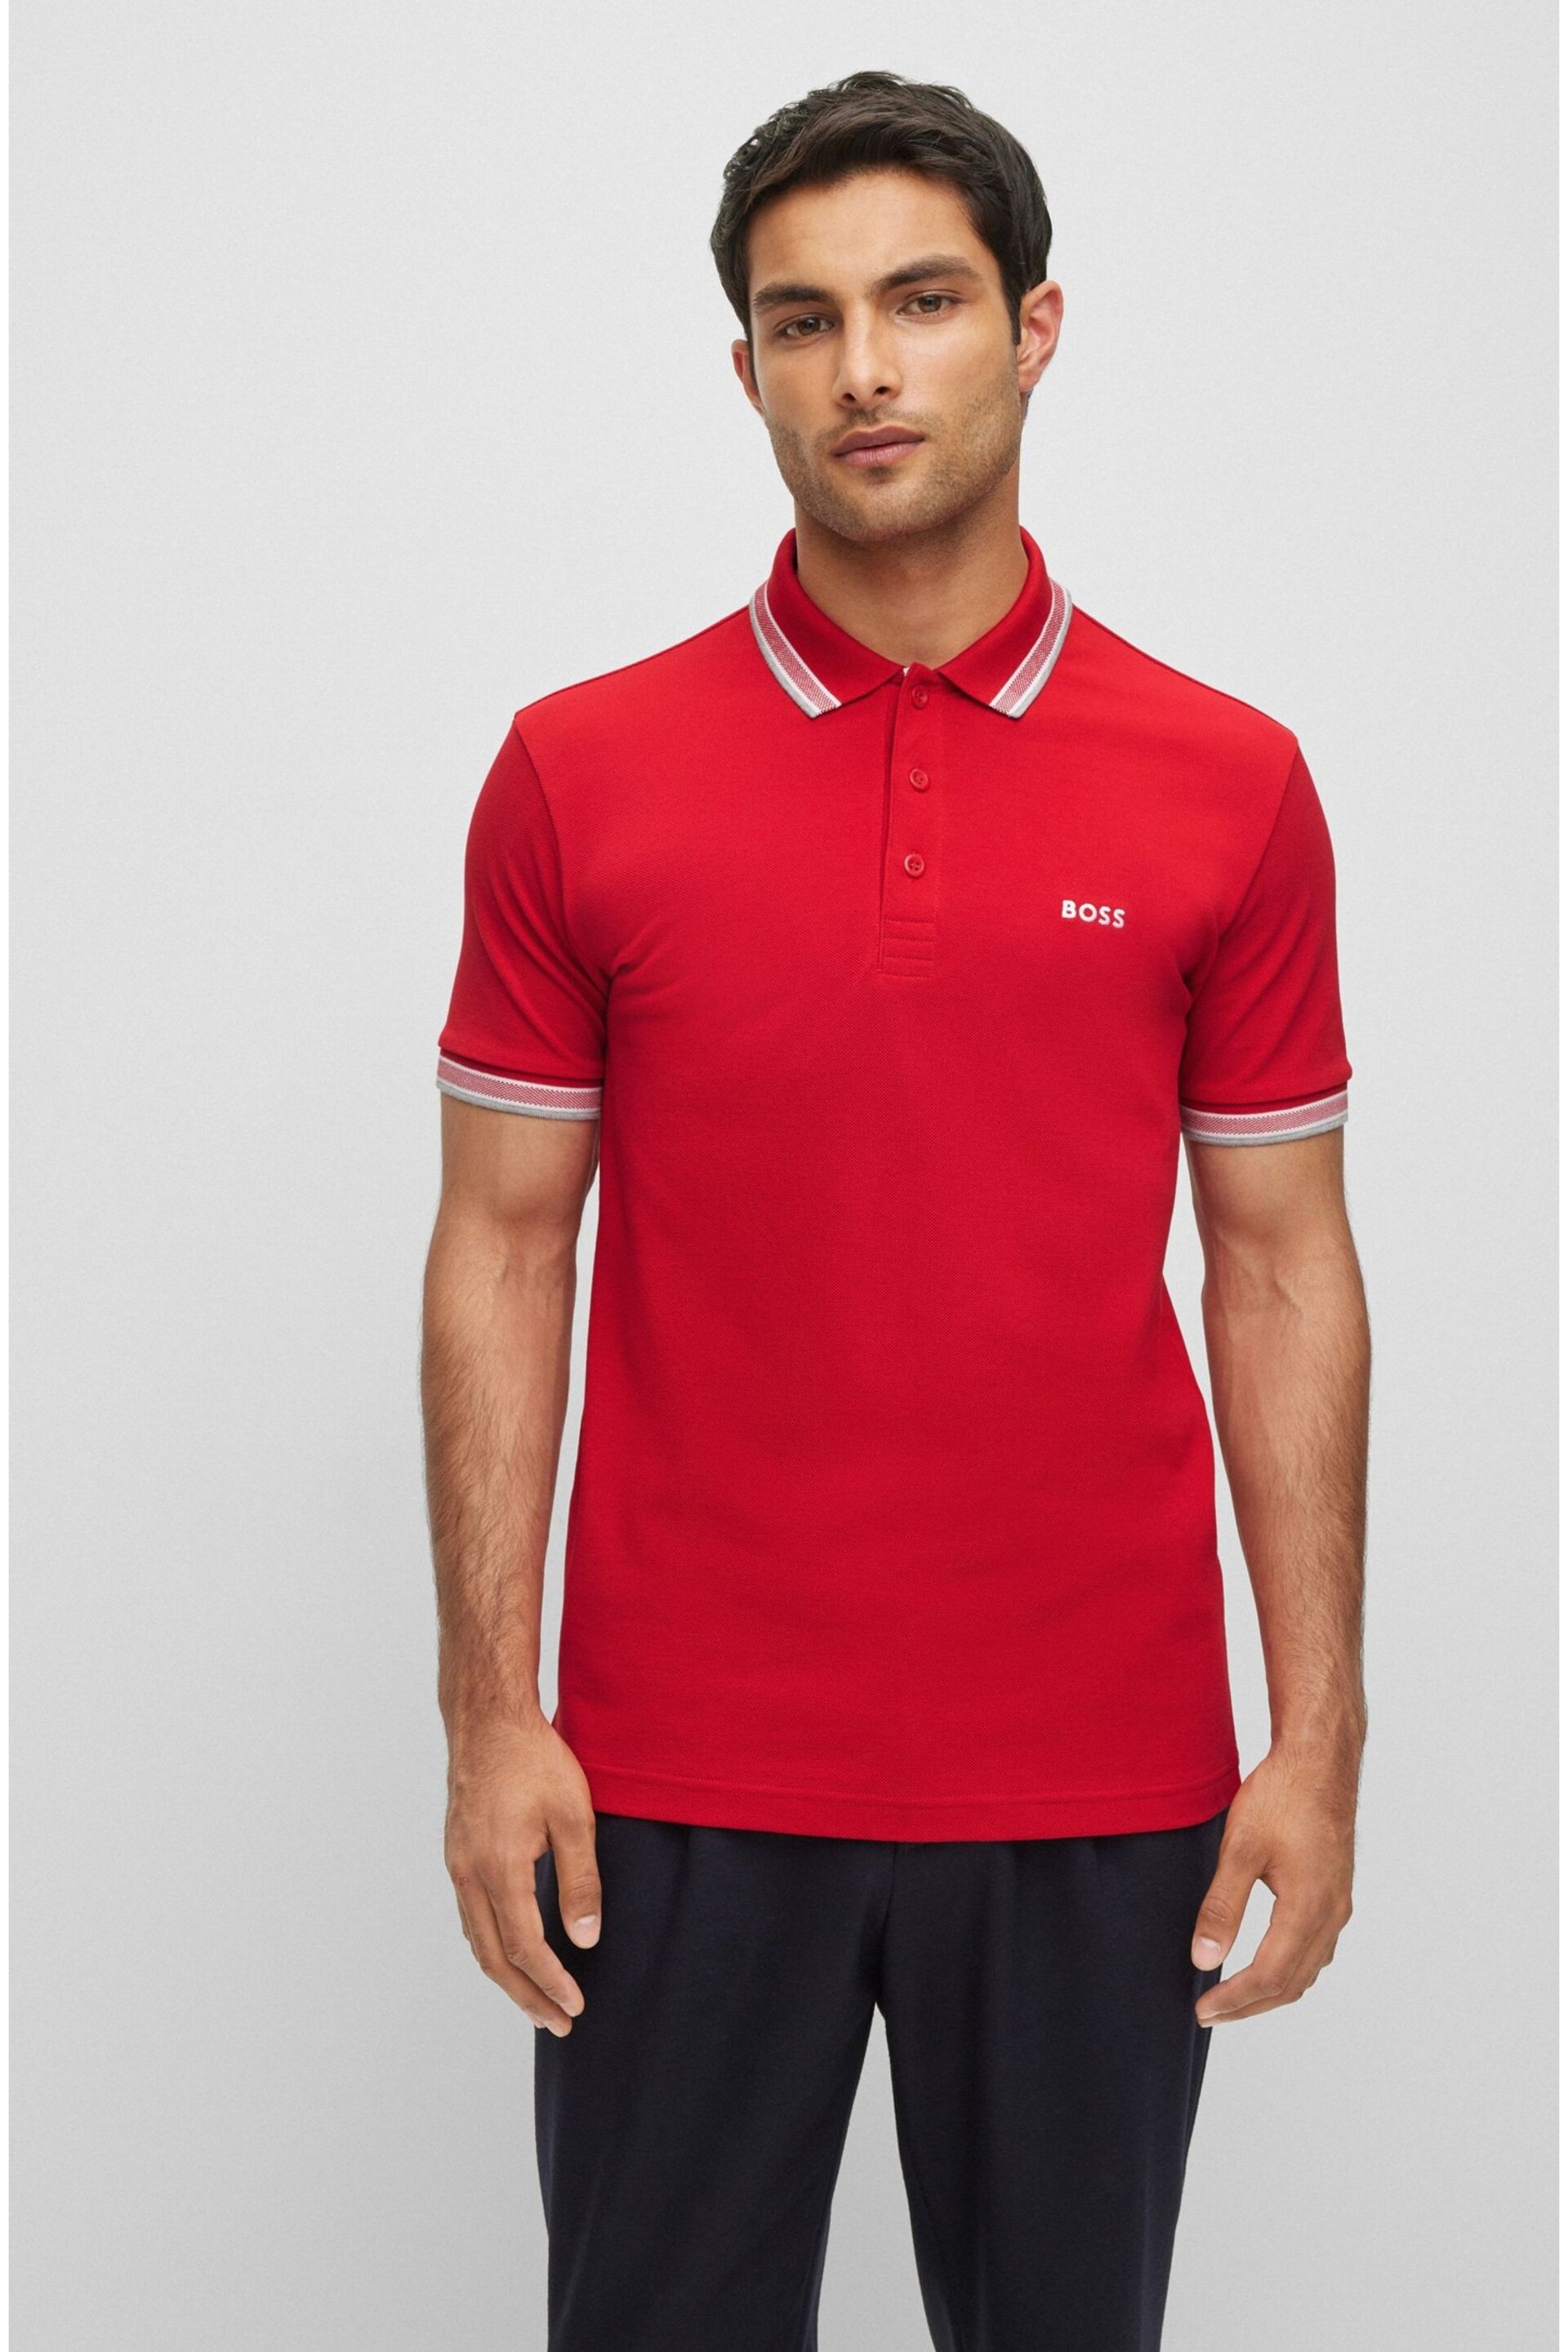 BOSS Red/Grey Tipping Paddy Polo Shirt - Image 1 of 5